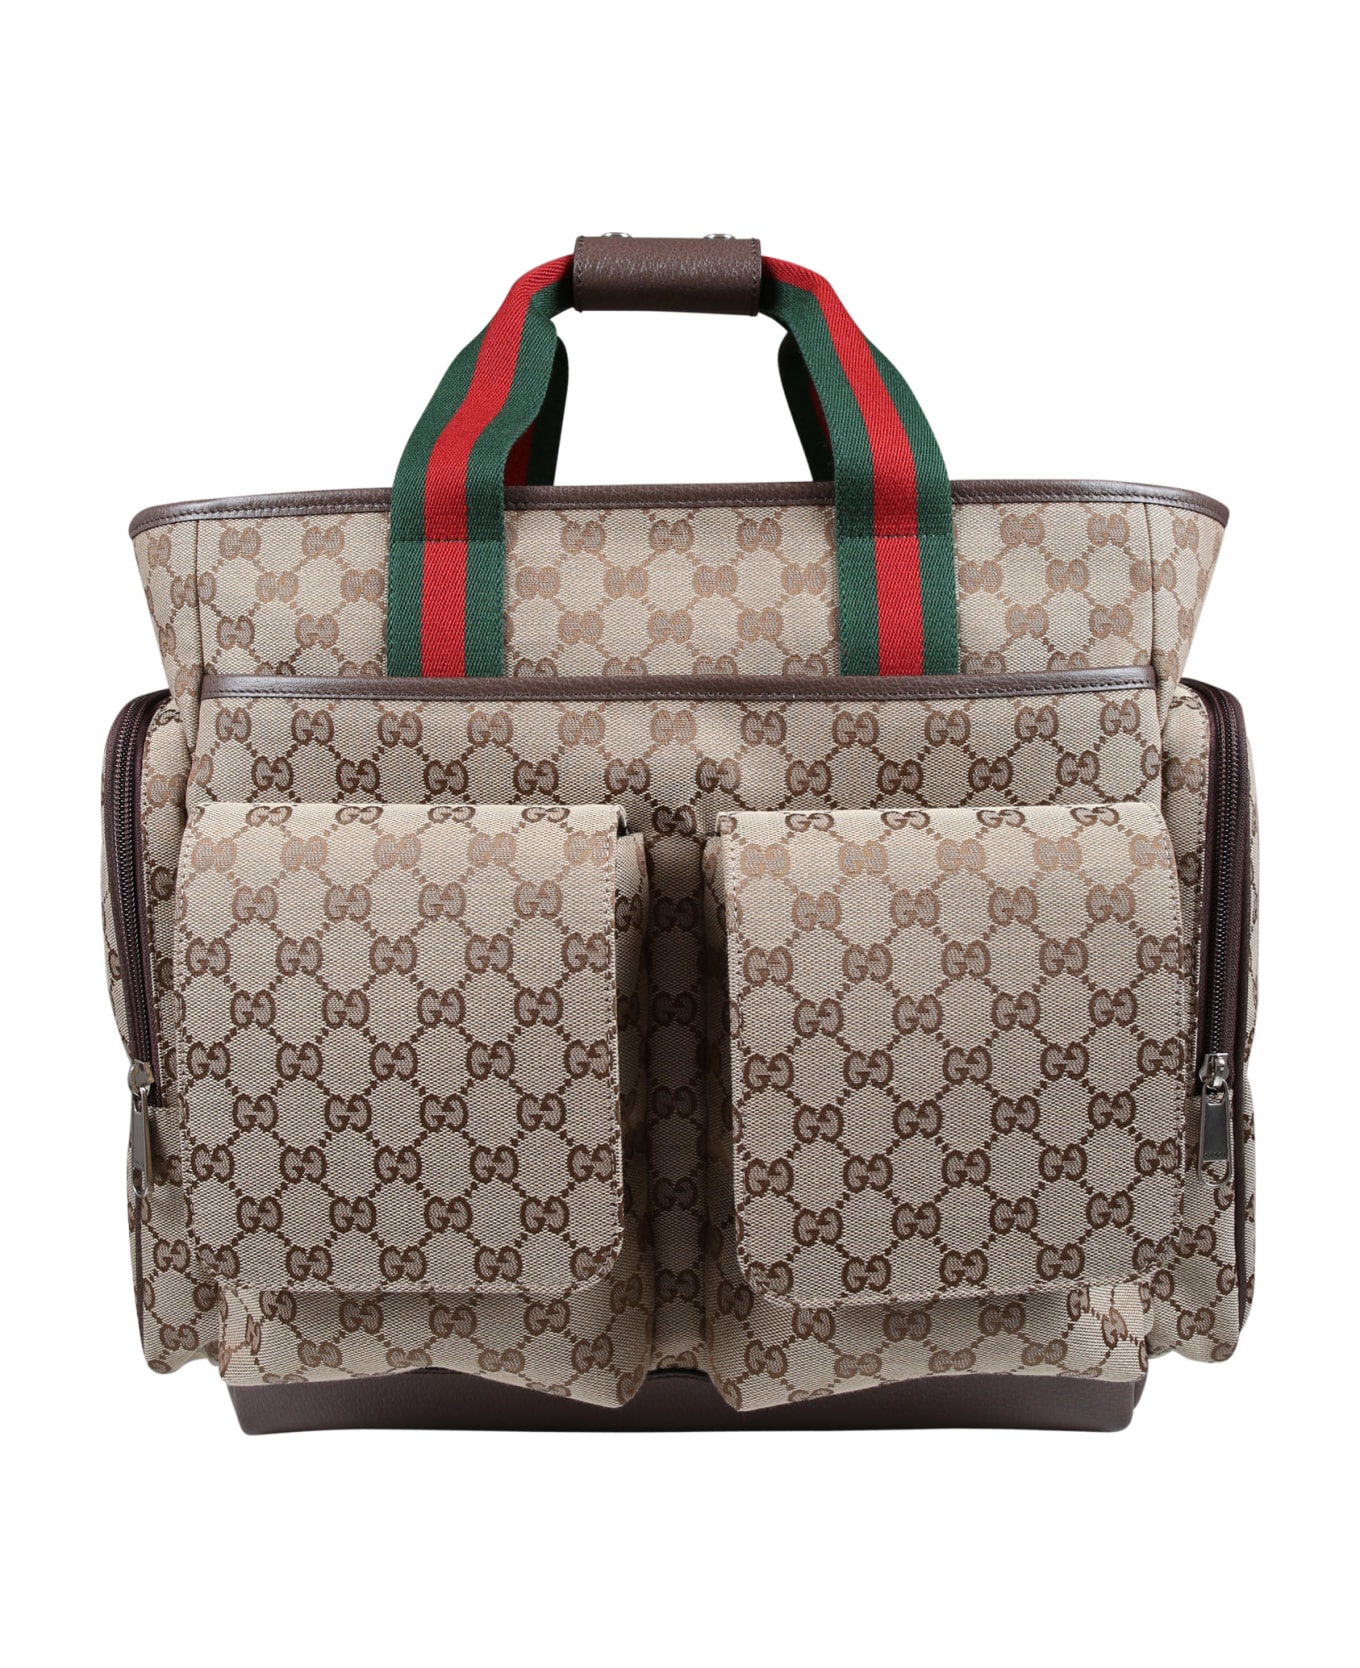 Gucci Beige Mum Bag With All-over Gg Logo - Beige アクセサリー＆ギフト